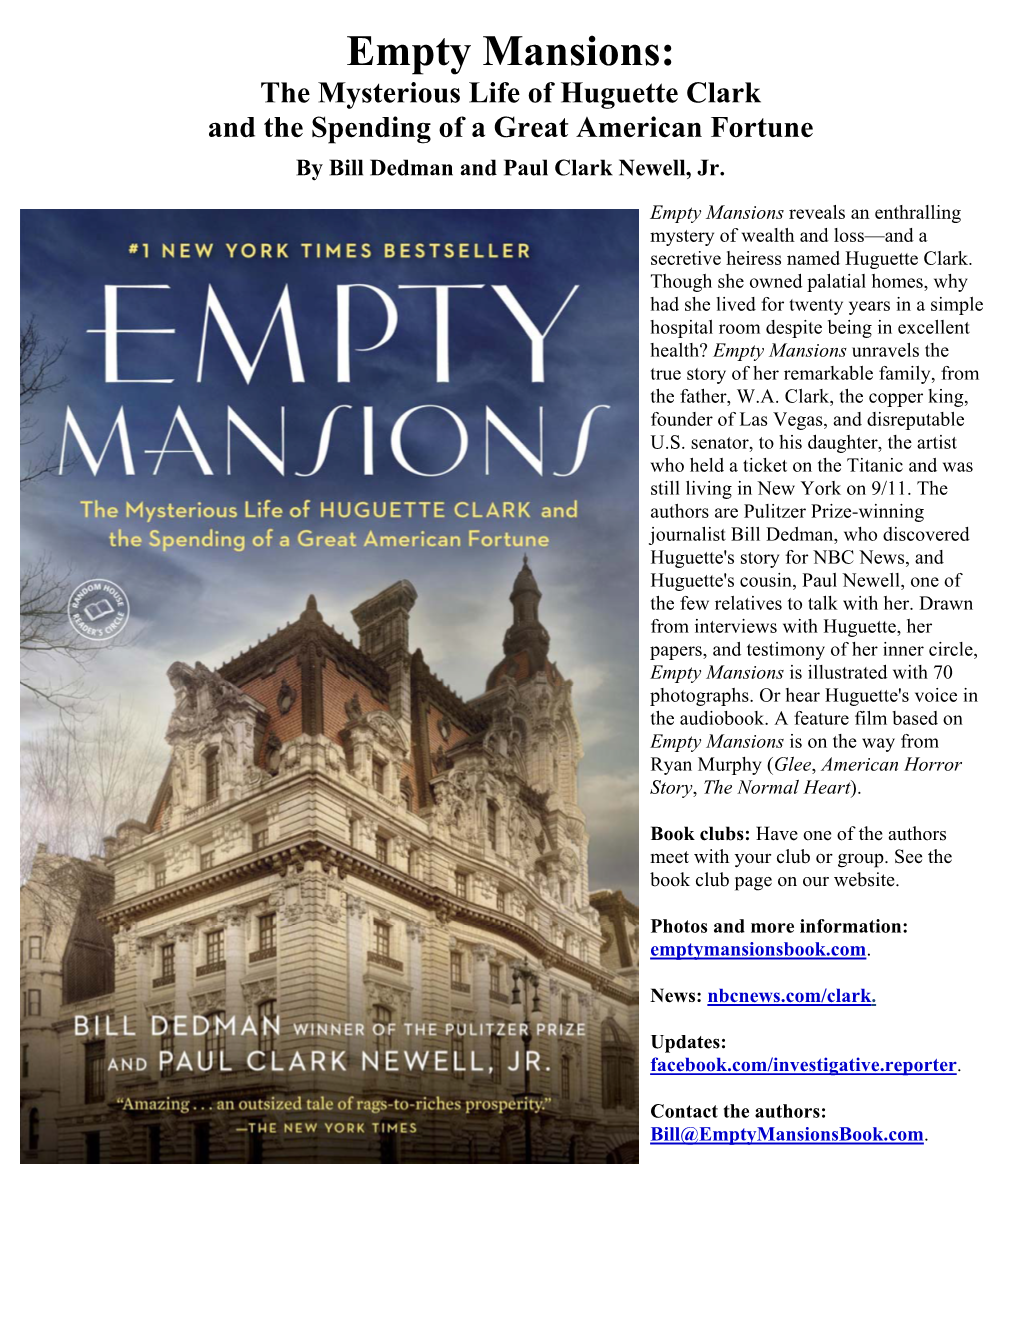 Empty Mansions: the Mysterious Life of Huguette Clark and the Spending of a Great American Fortune by Bill Dedman and Paul Clark Newell, Jr